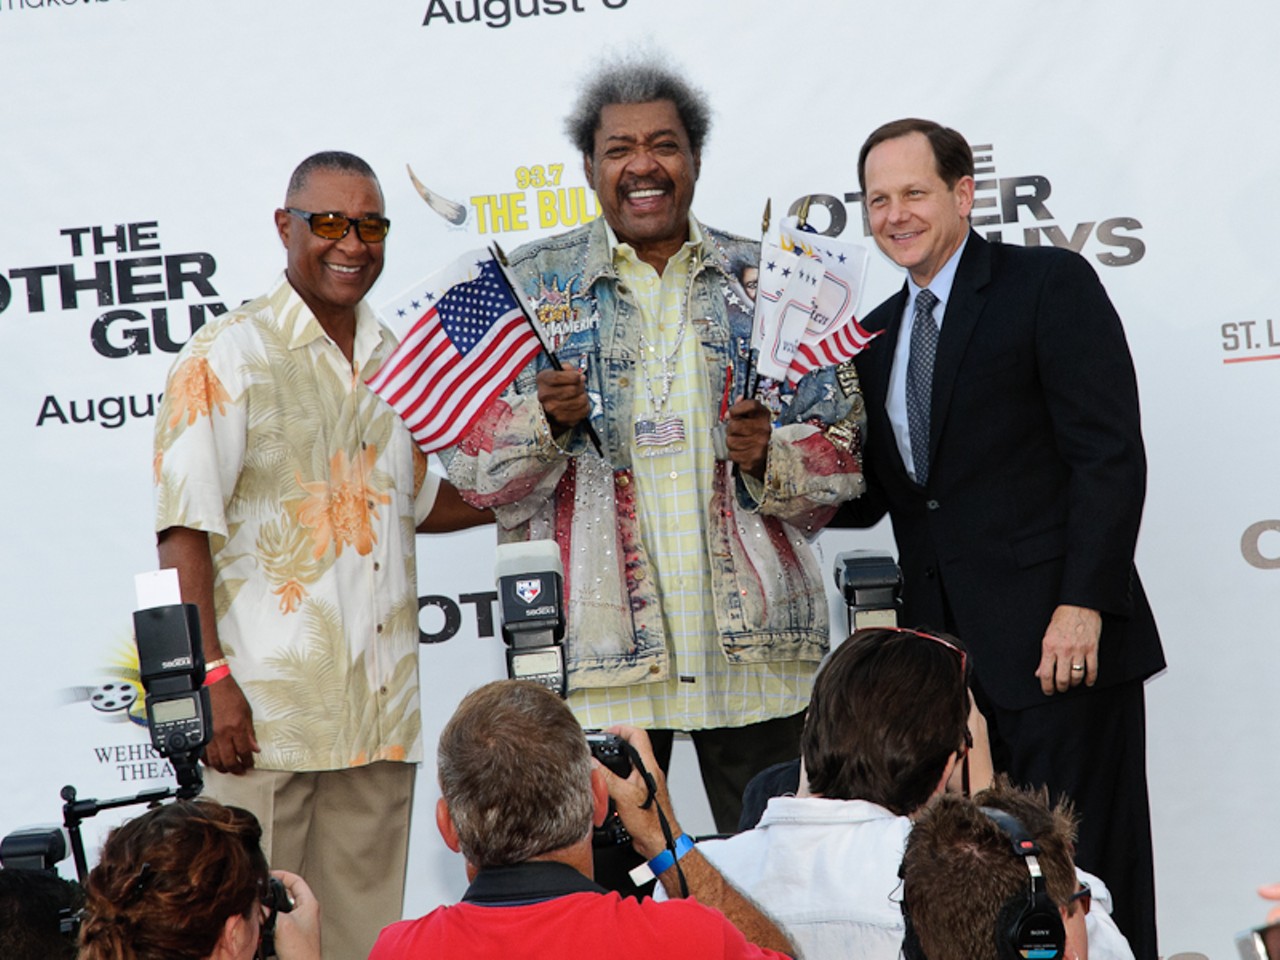 Local legend Ozzie Smith, wrestling promoter Don King, and St. Louis' Mayor Slay pose for a photo-op onstage before the premier.